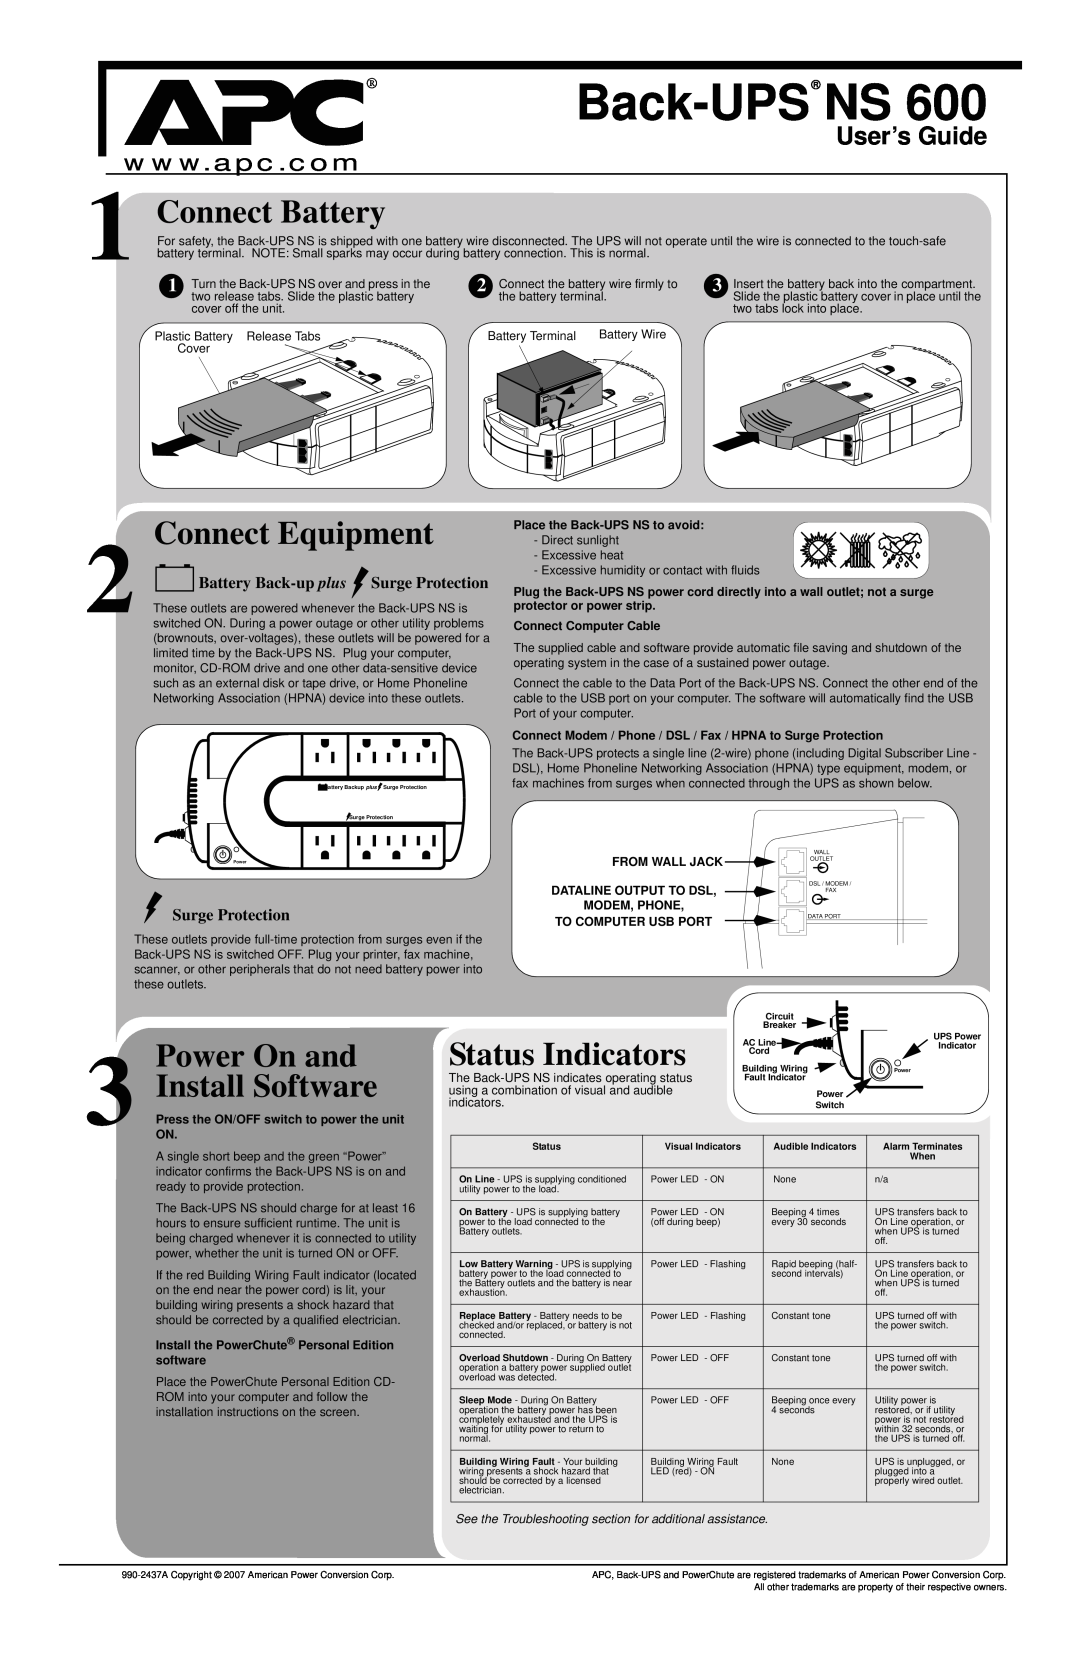 American Power Conversion NS 600 installation instructions User’s Guide, Back-UPS NS, Connect Battery, Connect Equipment 